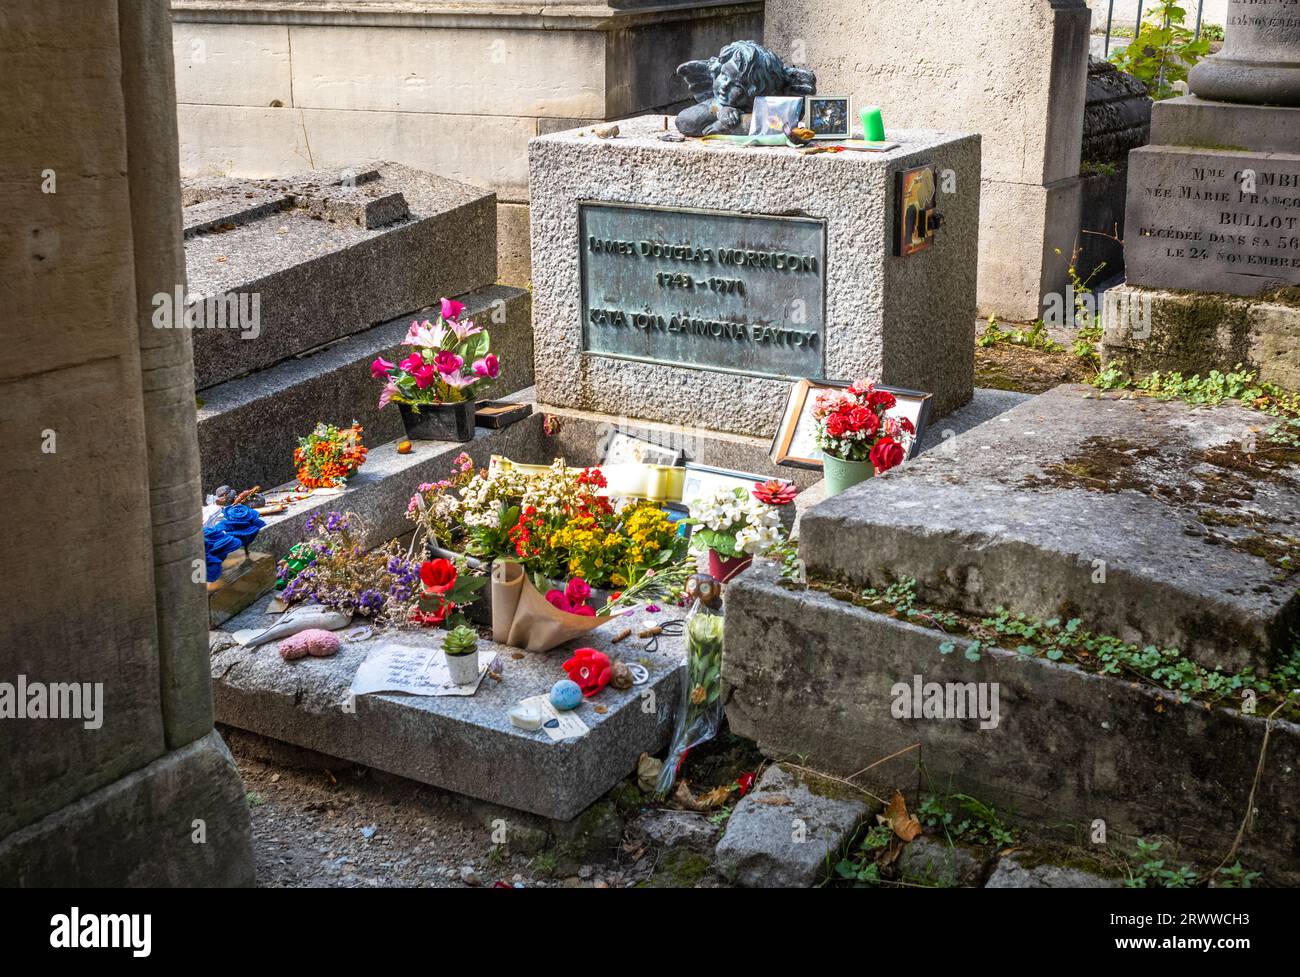 Flowers and momentos placed on the grave of Jim Morrison, the singer and frontman of the famous band The Doors, who died in Paris aged 27 in 1971. Per Stock Photo